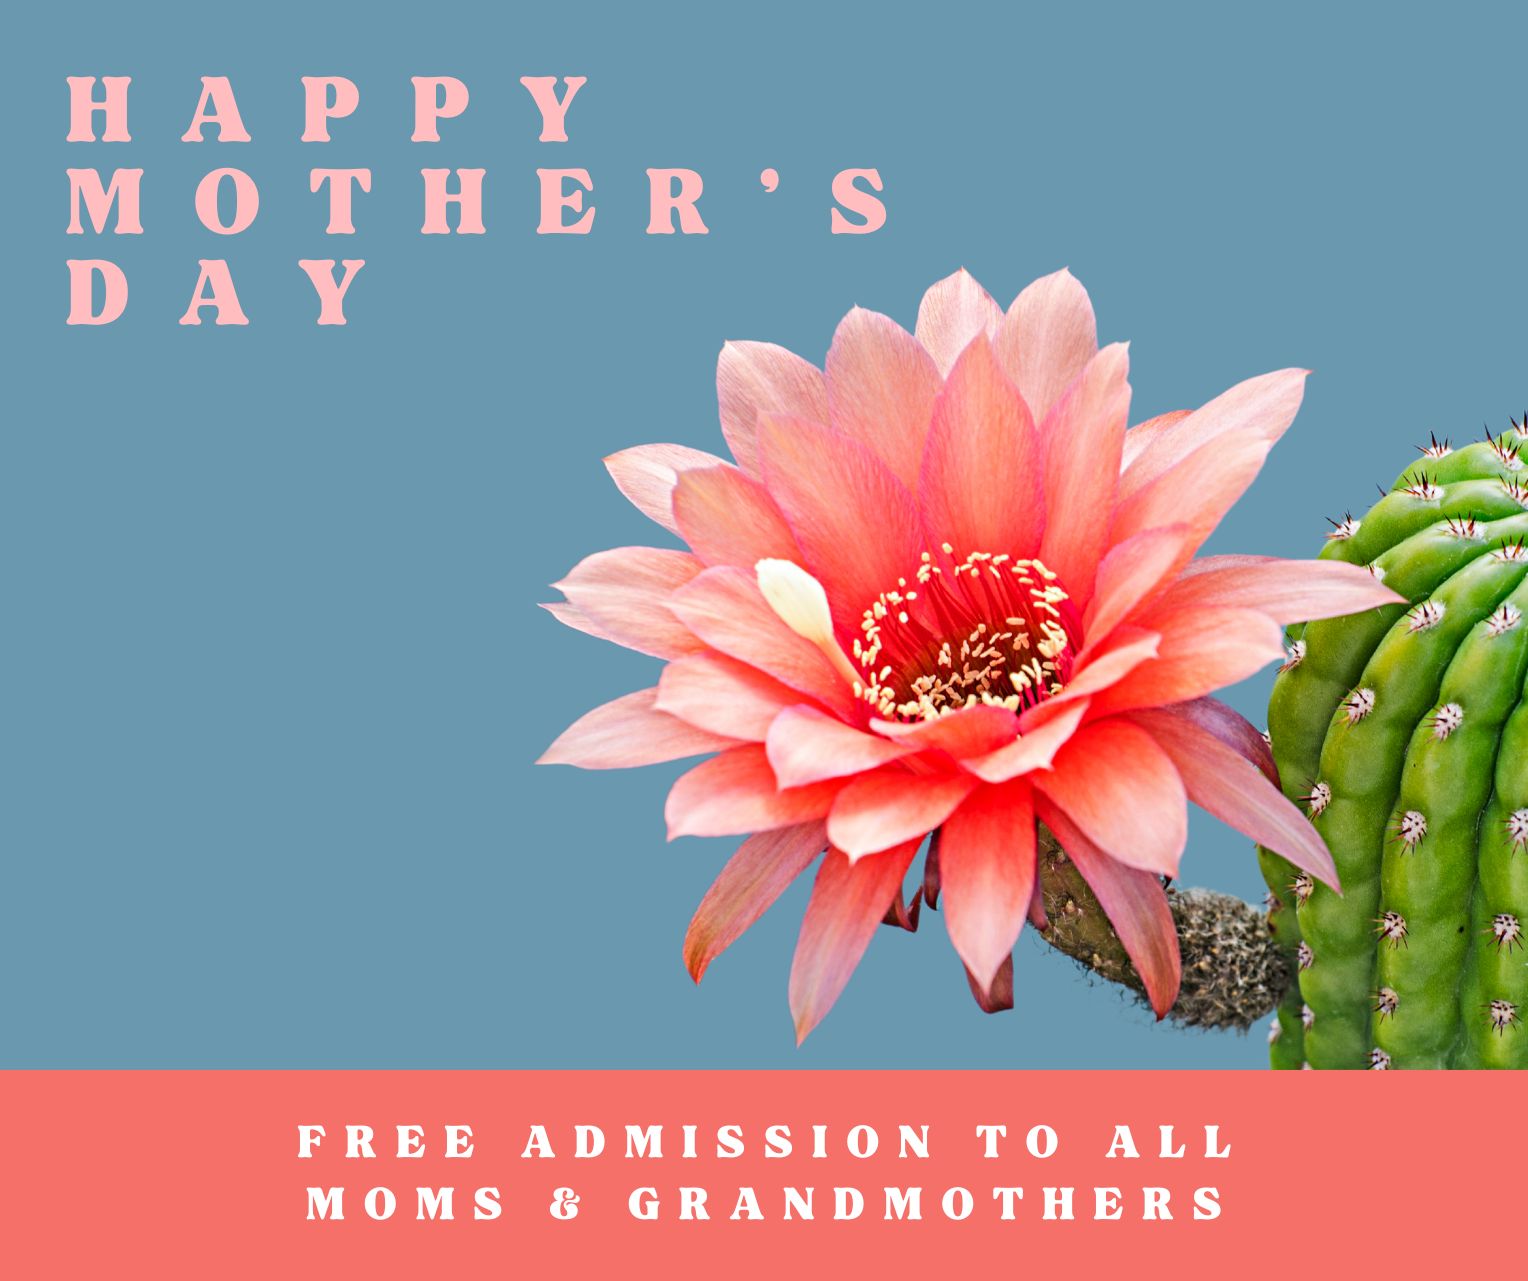 Mother’s Day | Free Admission for Mothers, Stepmothers, & Grandmothers!